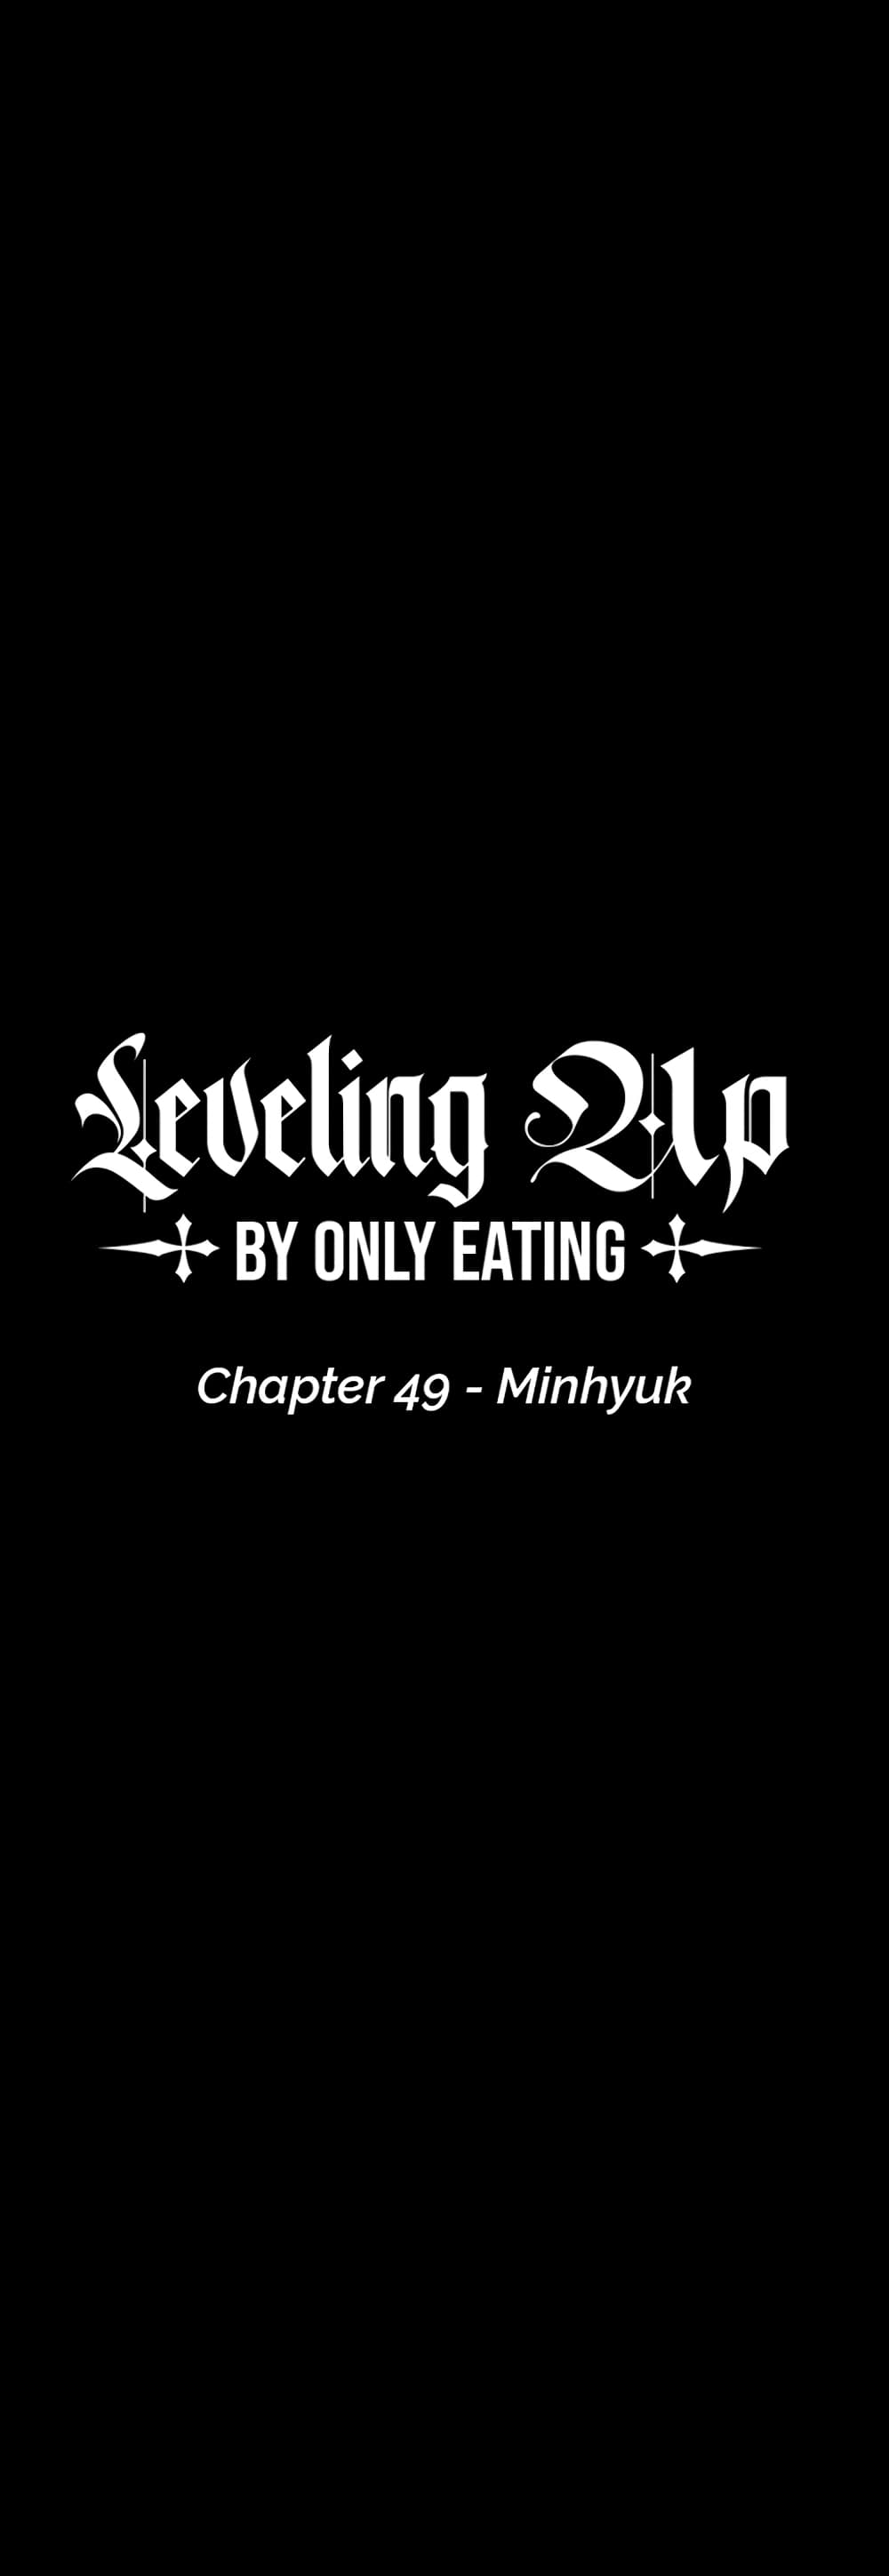 Leveling Up, By Only Eating!49 (2)